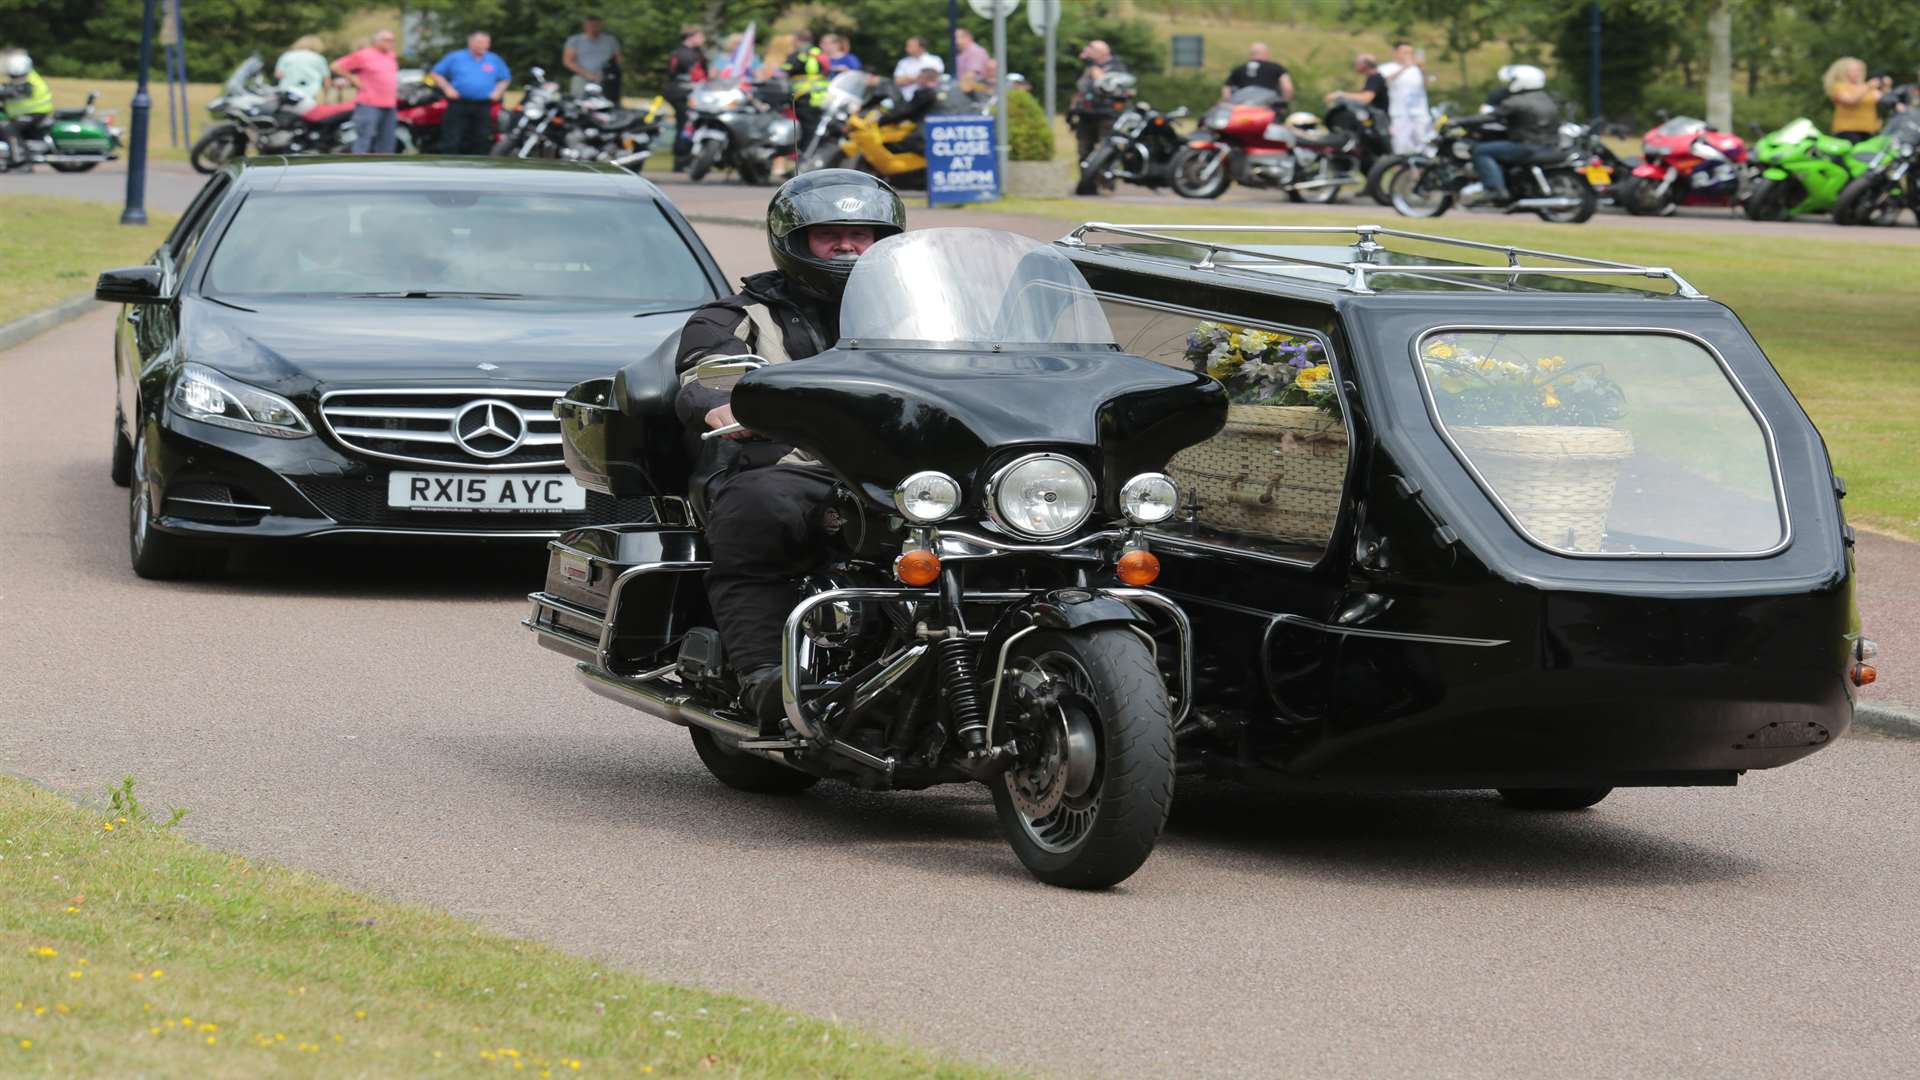 Mrs Boxall's motorbike and sidecar hearse